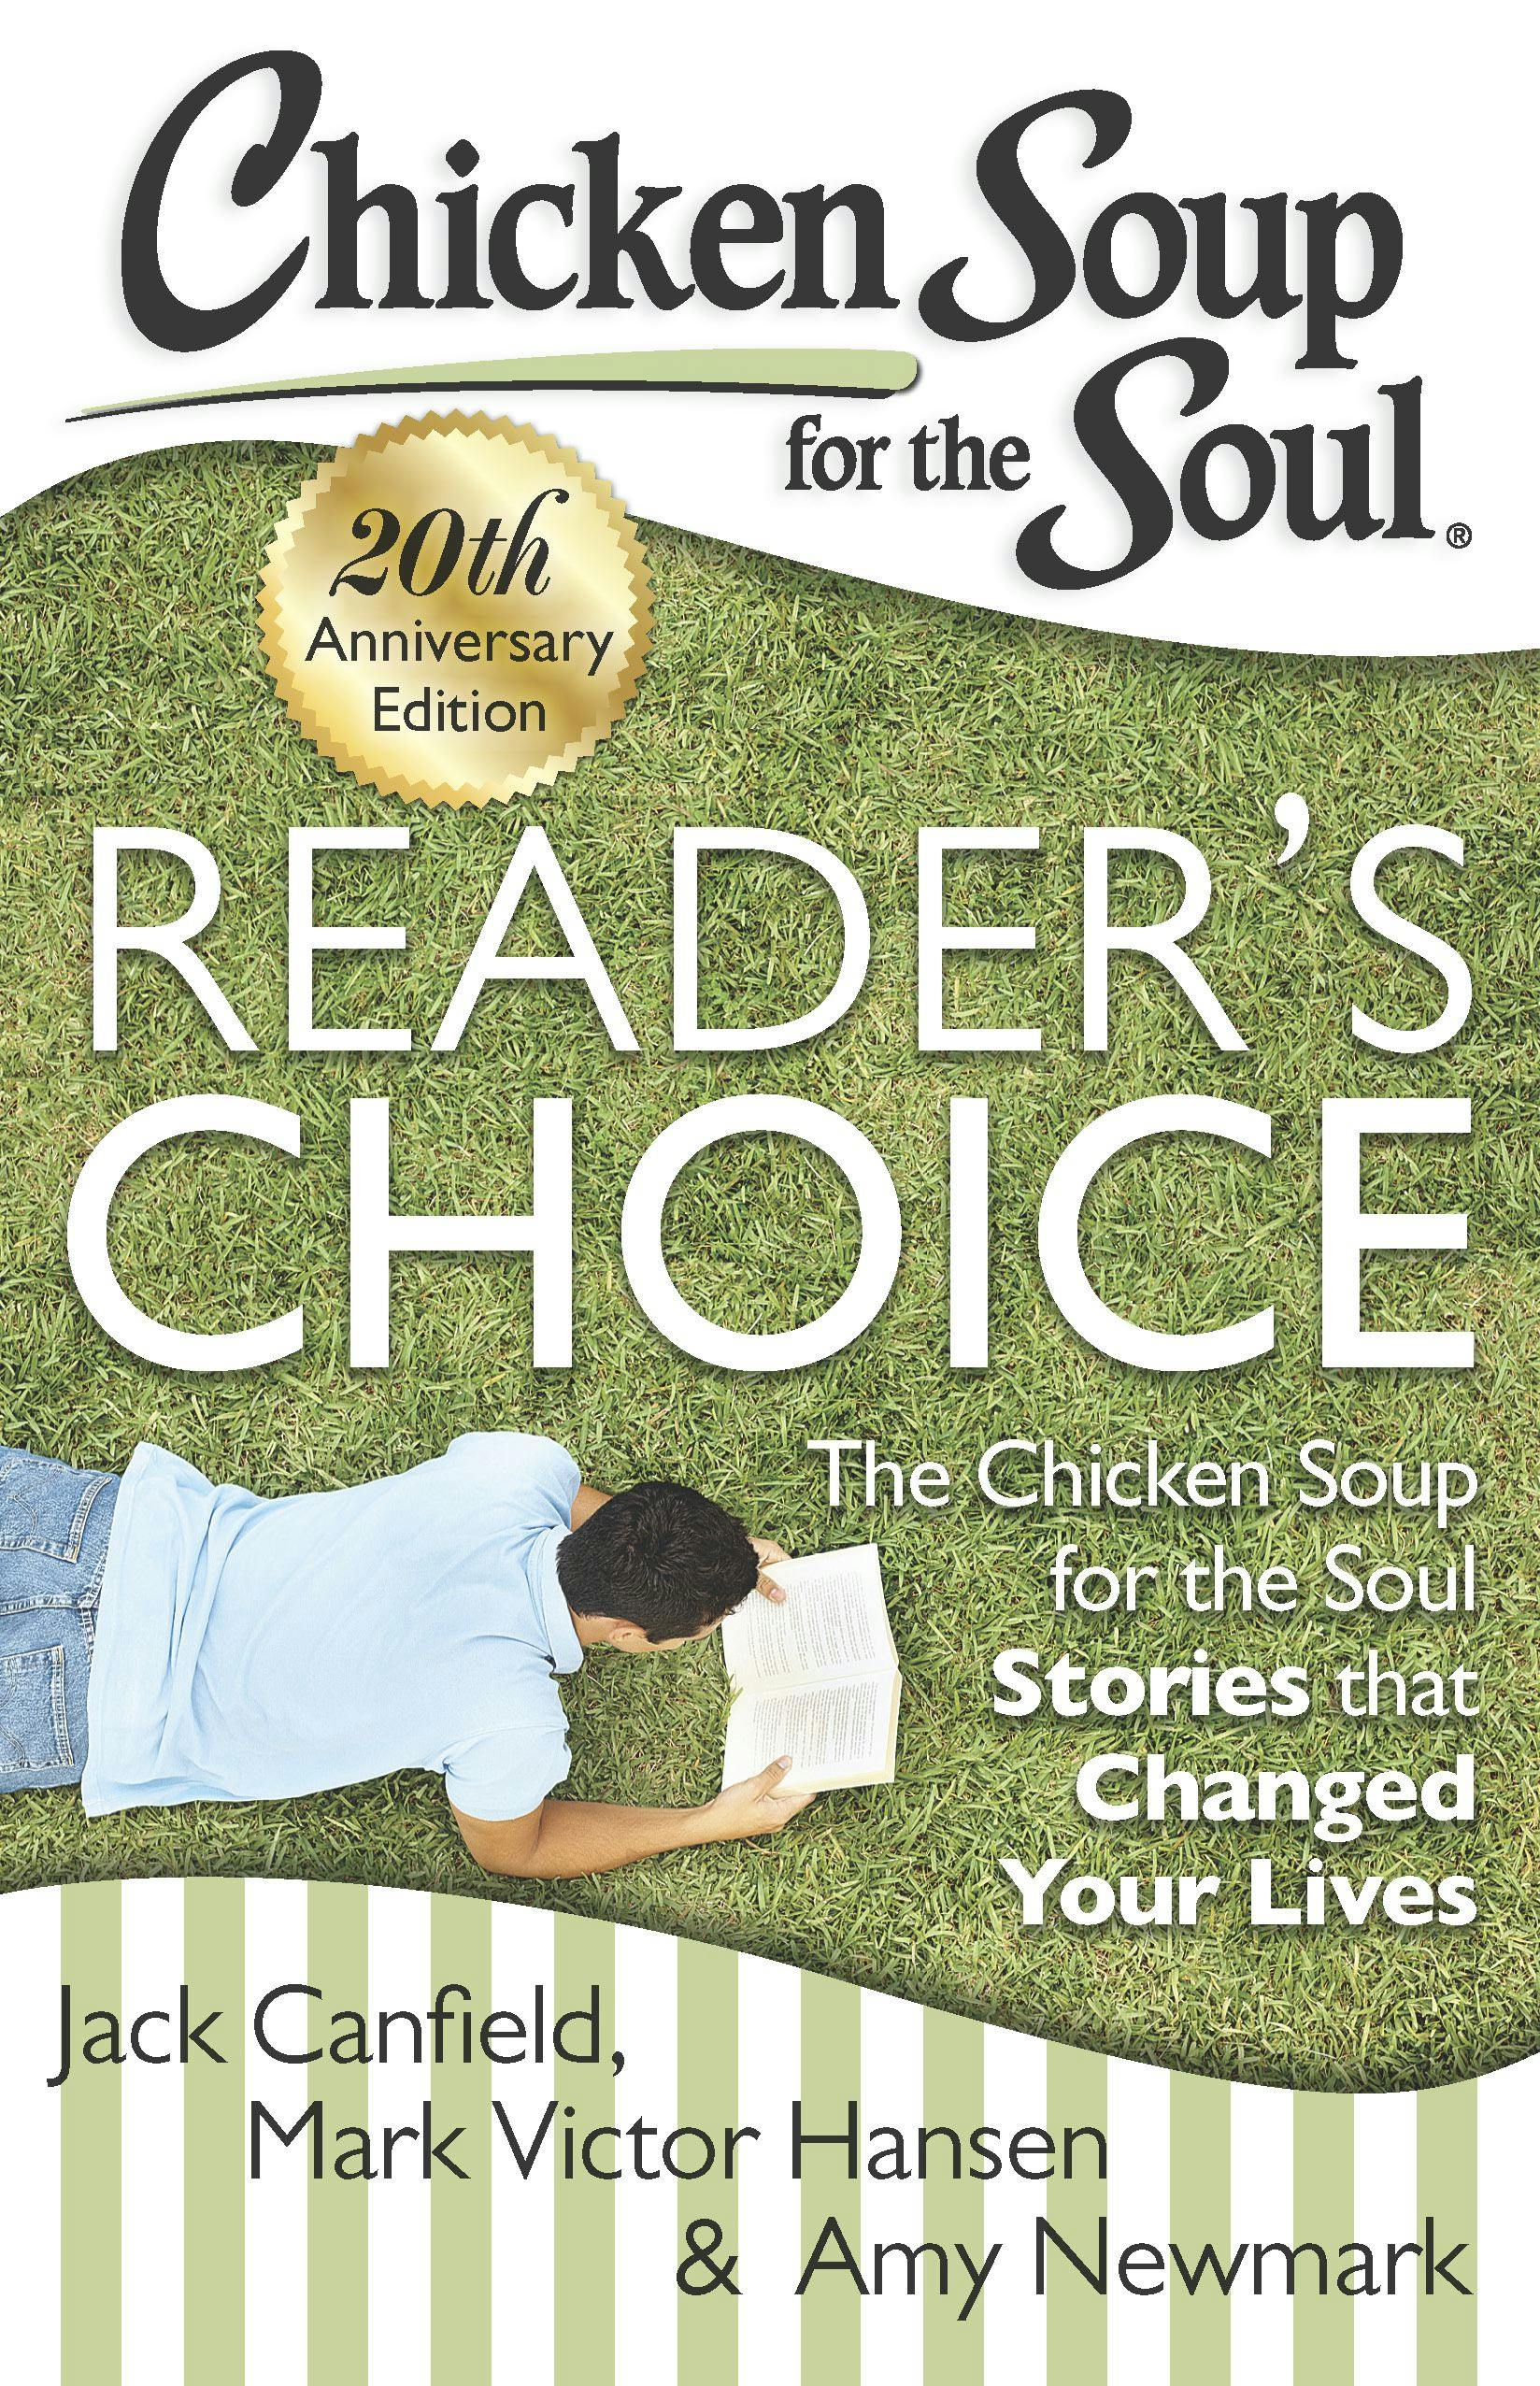 Chicken Soup for the Soul: Reader's Choice 20th Anniversary Edition: The Chicken Soup for the Soul Stories that Changed Your Lives - Mark Victor Hansen, Jack Canfield, Amy Newmark